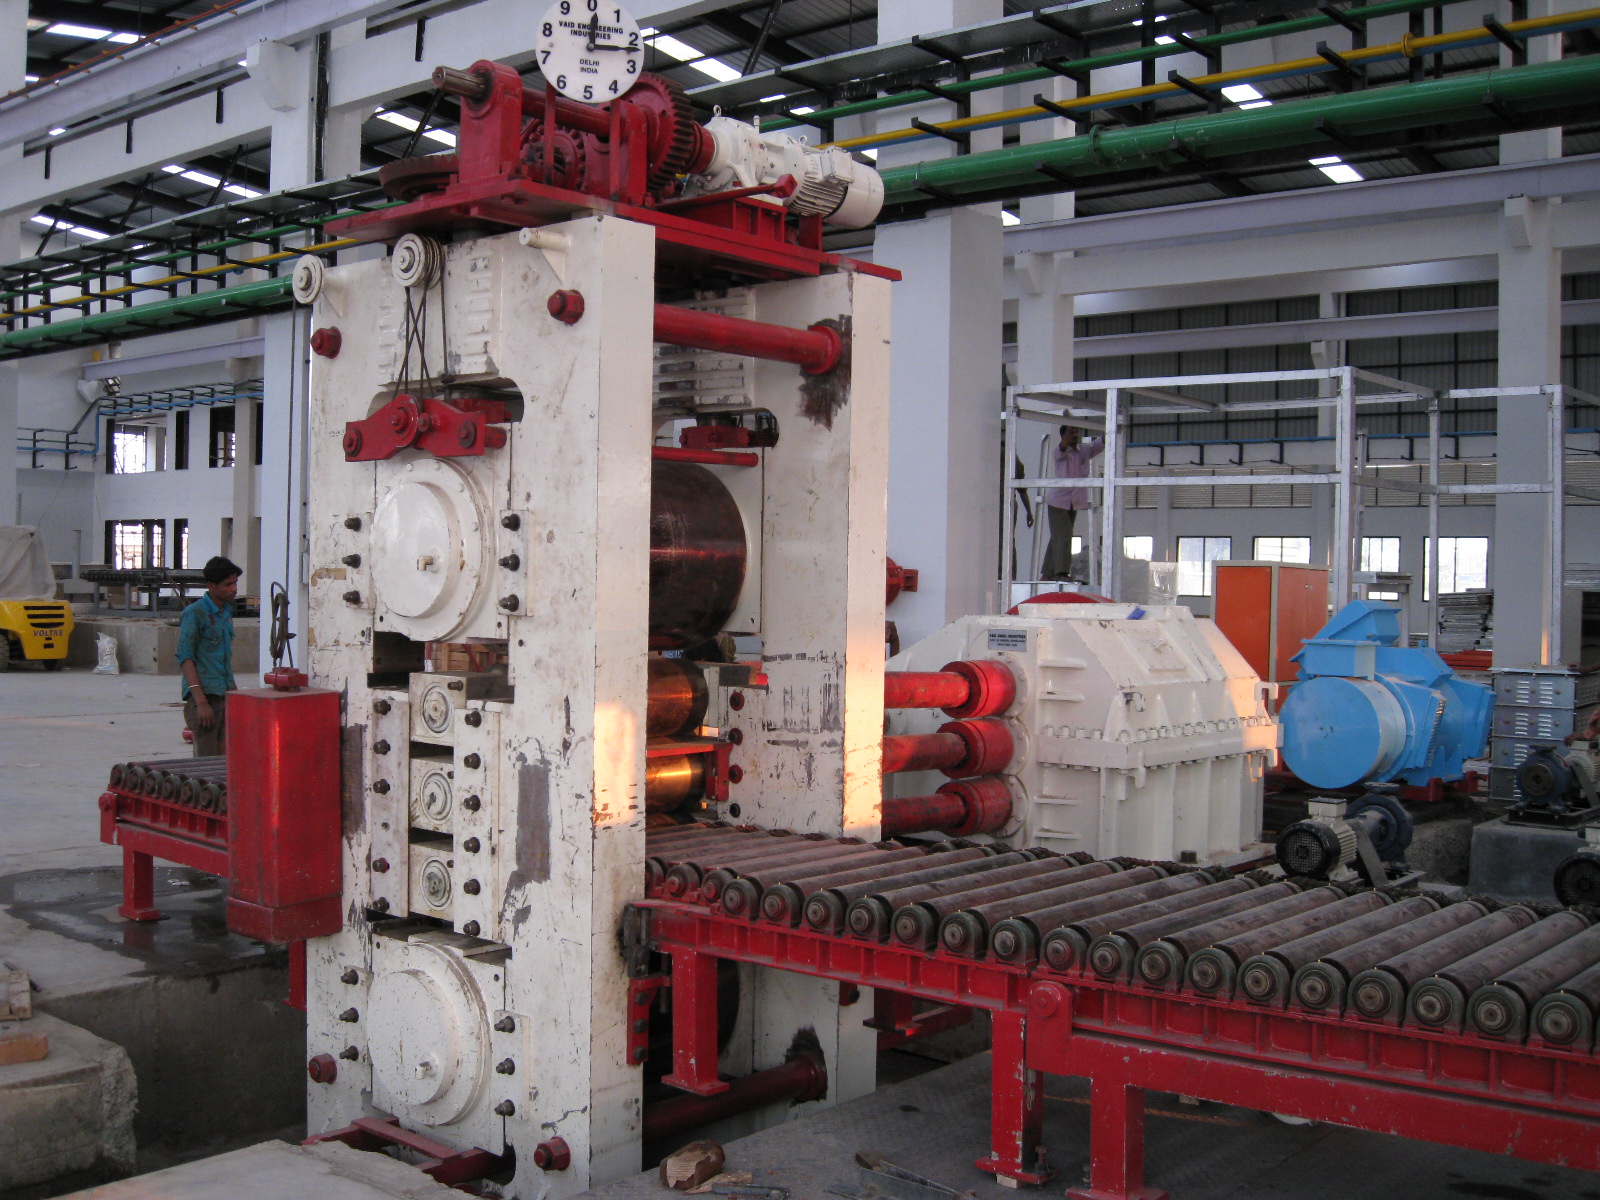 Stainless Steel 5 Hi Hot Rolling Mill